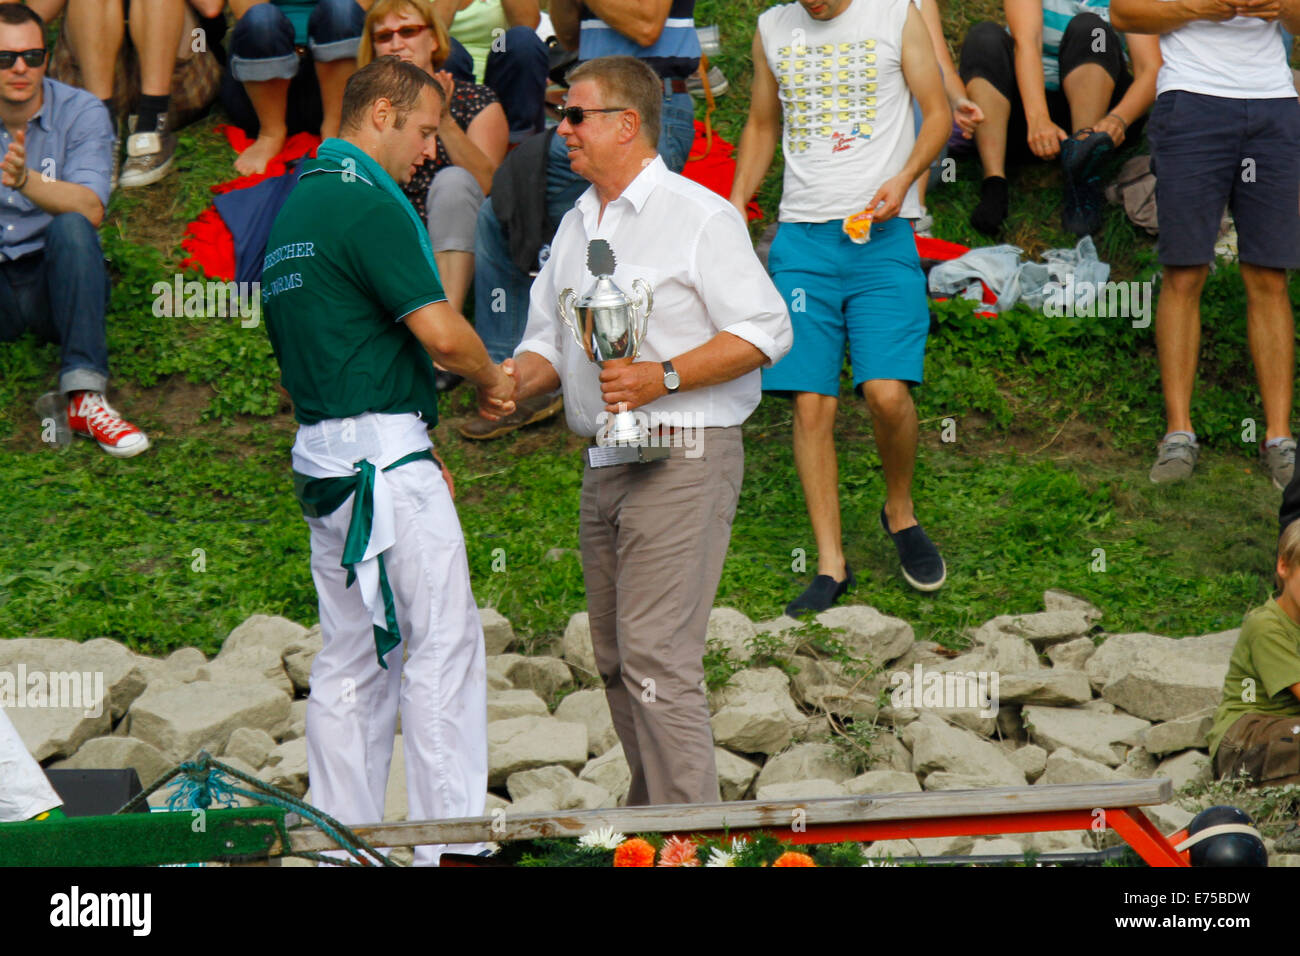 Worms, Germany. 7th September 2014. The Lord Mayor of Worms, Michael Kissel (right), congratulates the winner of the 2014 Fischerstechen (fishermen's joust). Fifteen teams each consisting of 2 rowers and one man fighting with a lance, competed in the 65th anniversary Fischerstechen (Fishermen's Joust) held on the final day of the Backfischfest. Credit:  Michael Debets/Alamy Live News Stock Photo